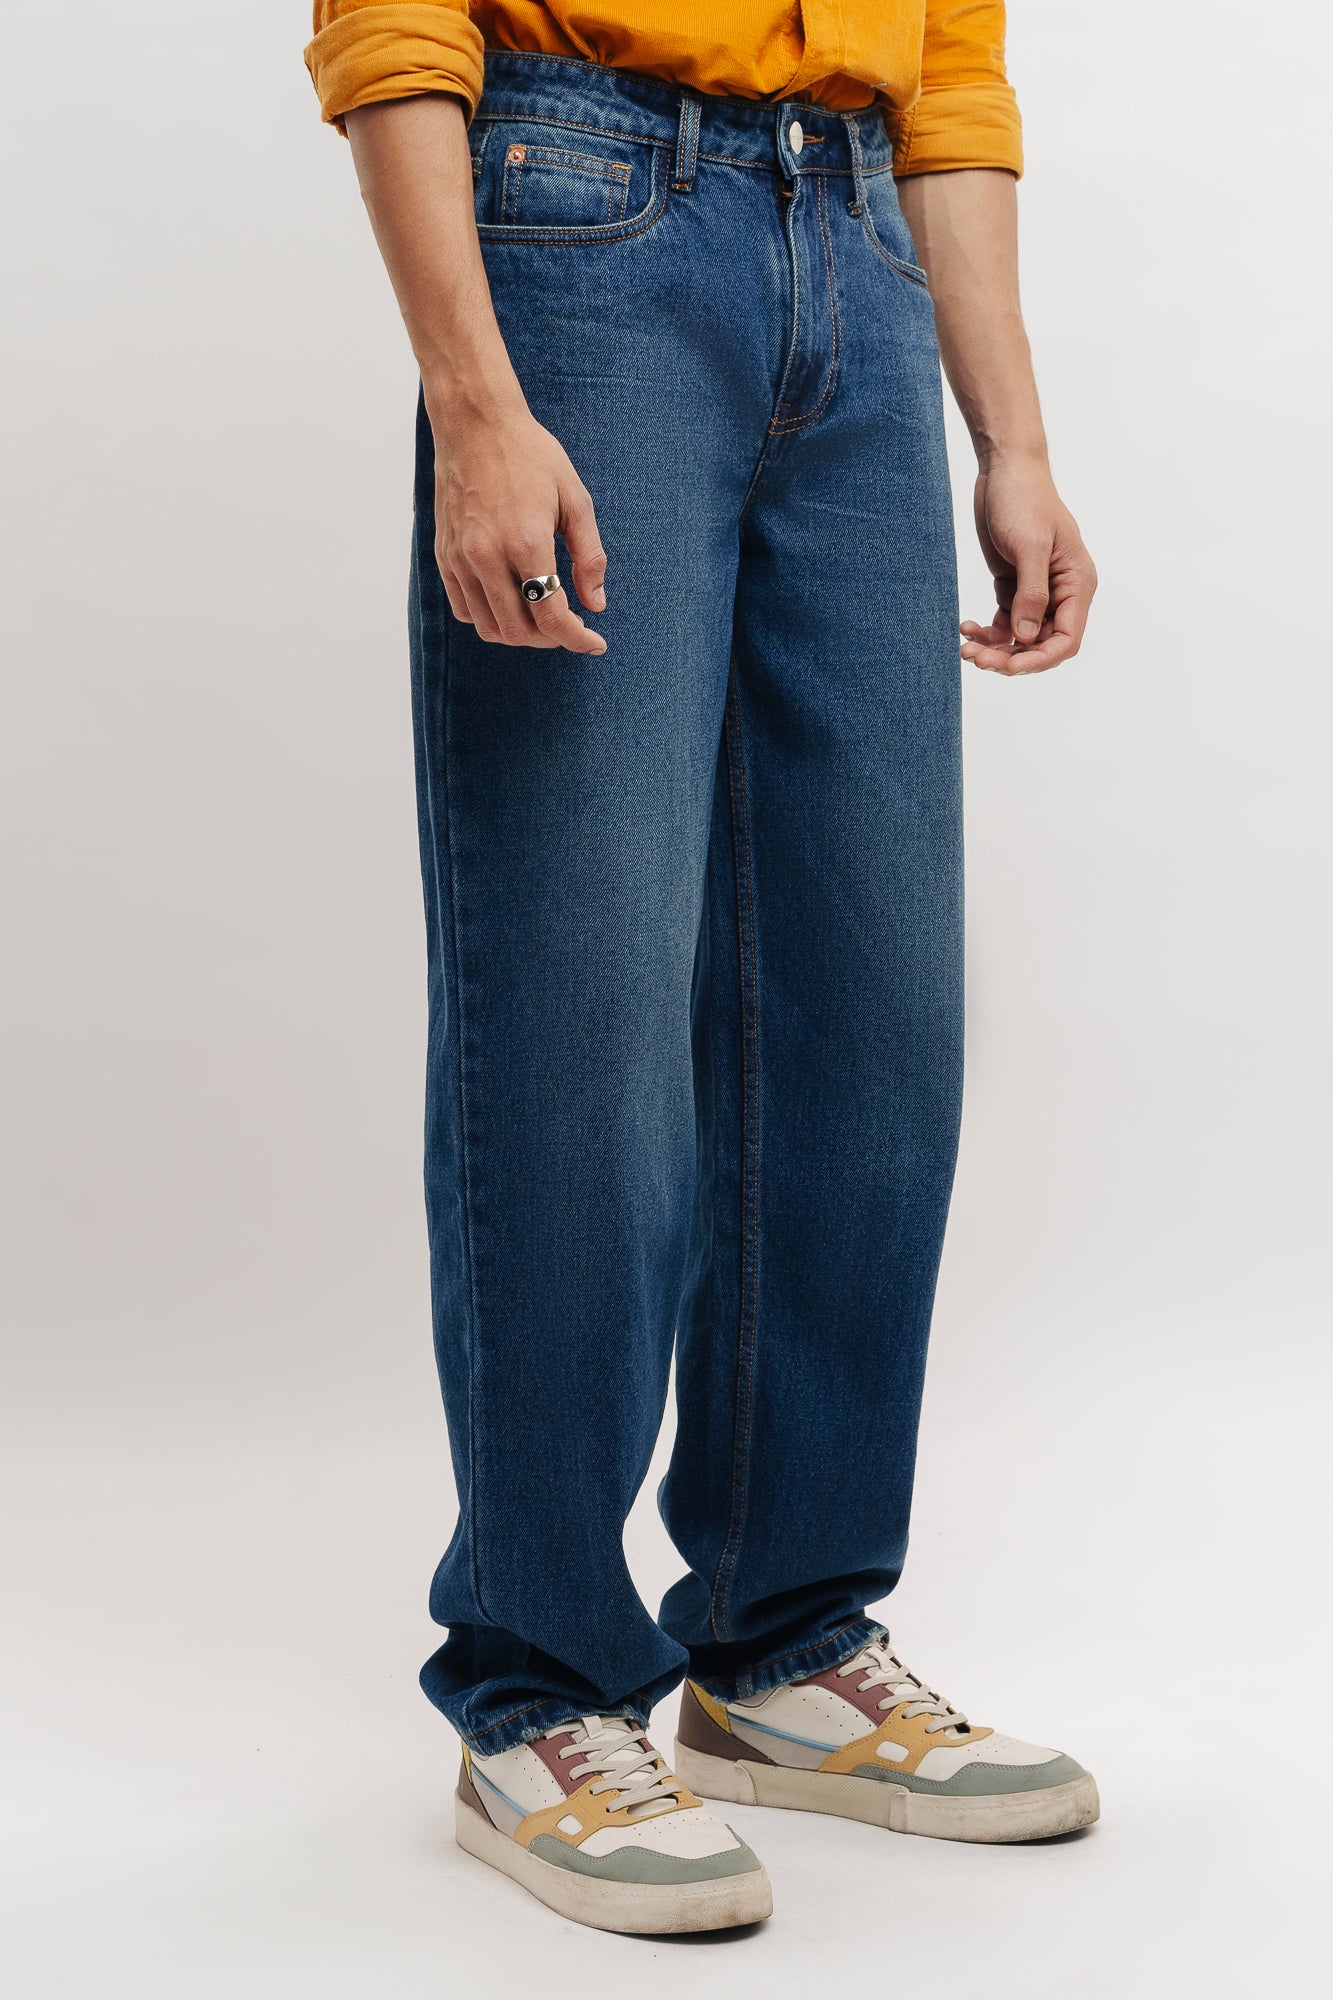 TINTED BAGGY MEN'S JEANS